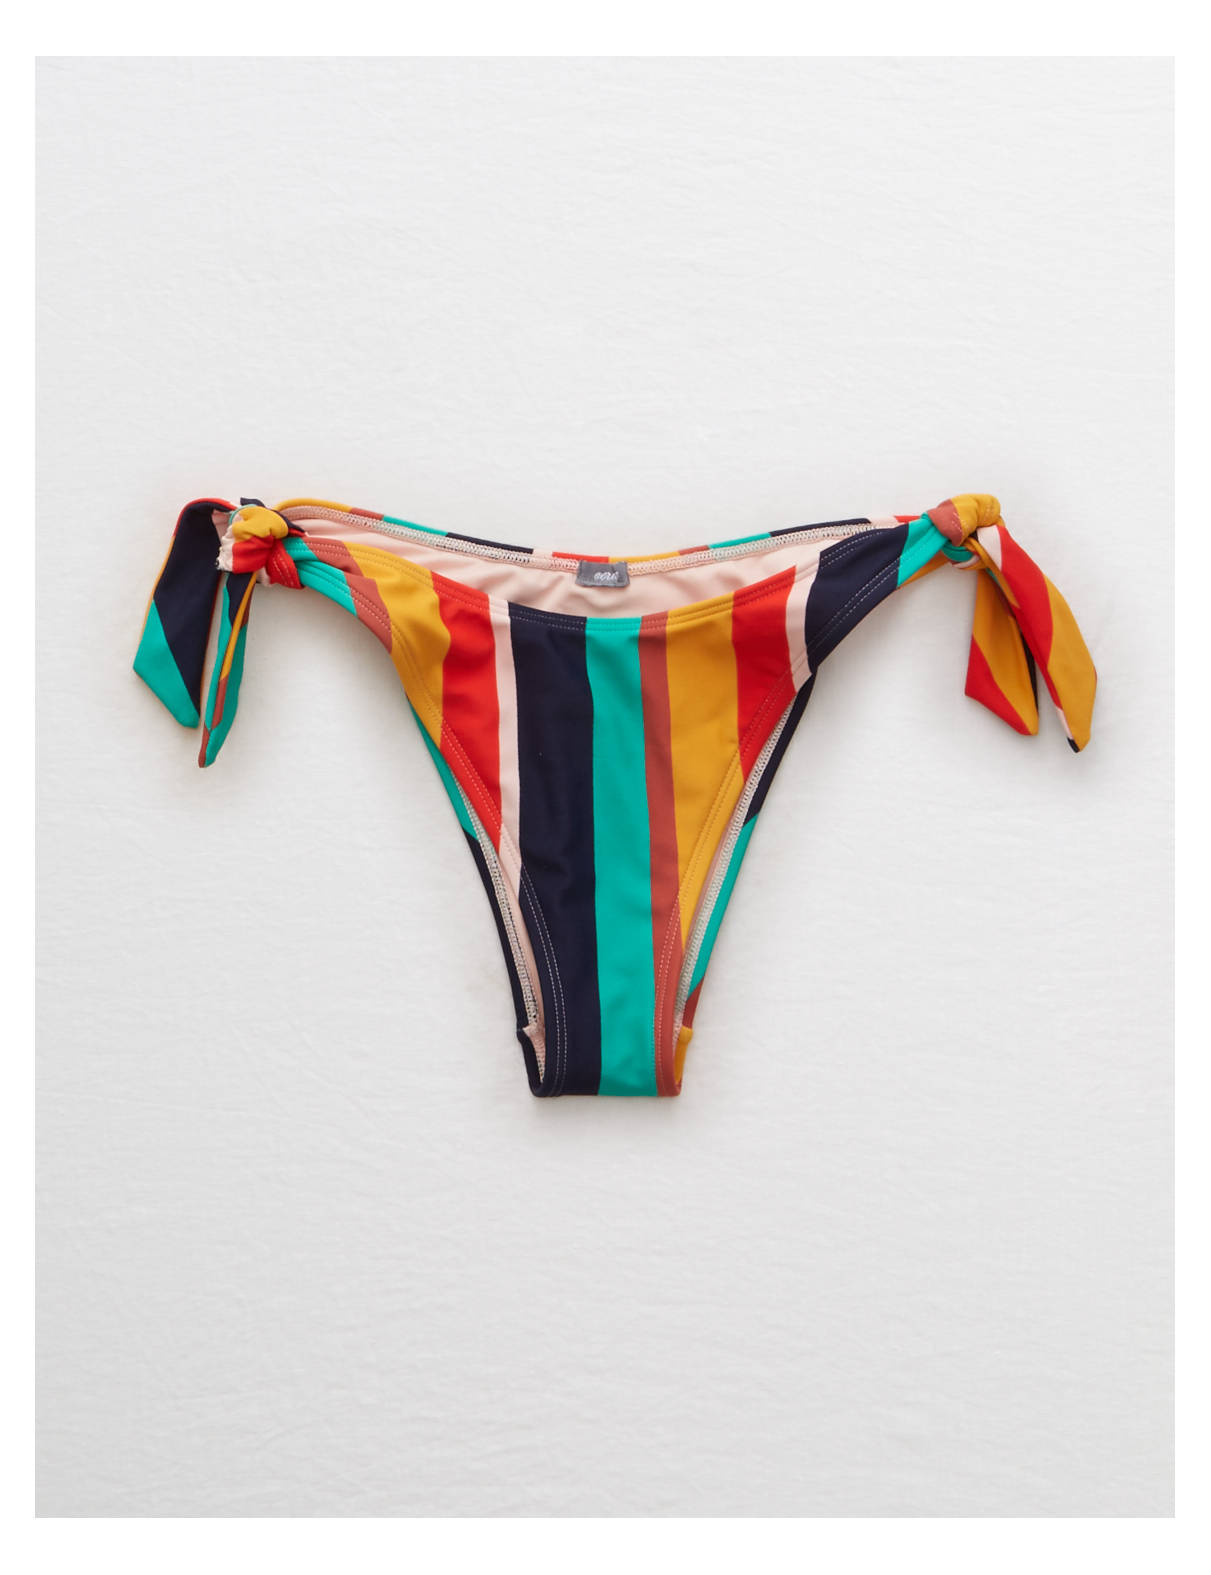 American eagle swimwears first appeared on chictopia's streetstyle gal...